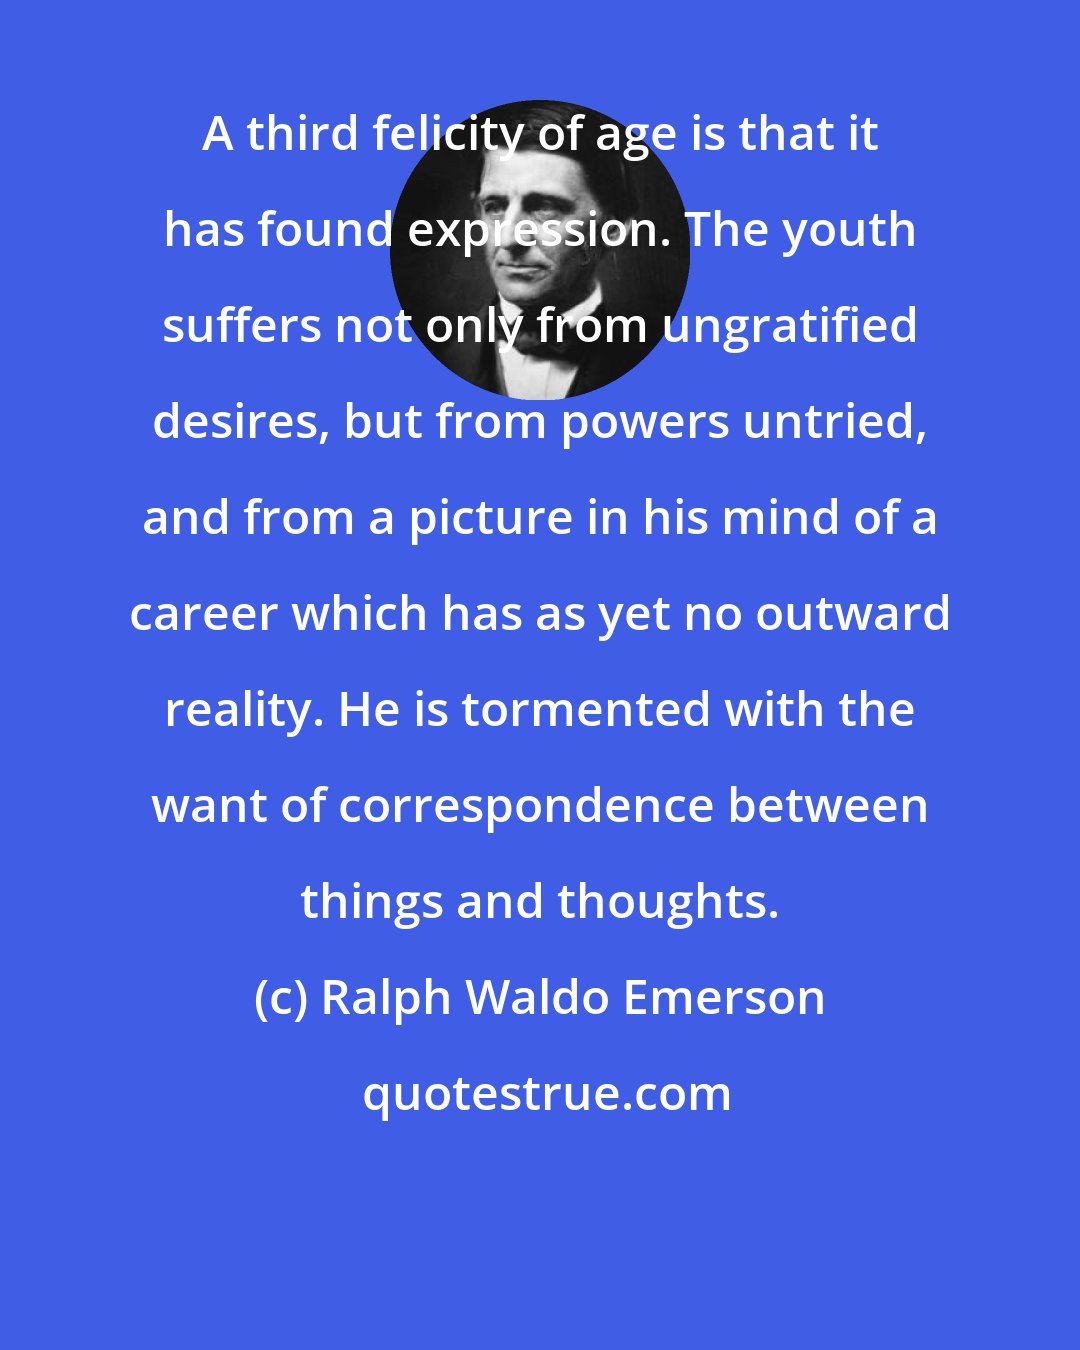 Ralph Waldo Emerson: A third felicity of age is that it has found expression. The youth suffers not only from ungratified desires, but from powers untried, and from a picture in his mind of a career which has as yet no outward reality. He is tormented with the want of correspondence between things and thoughts.